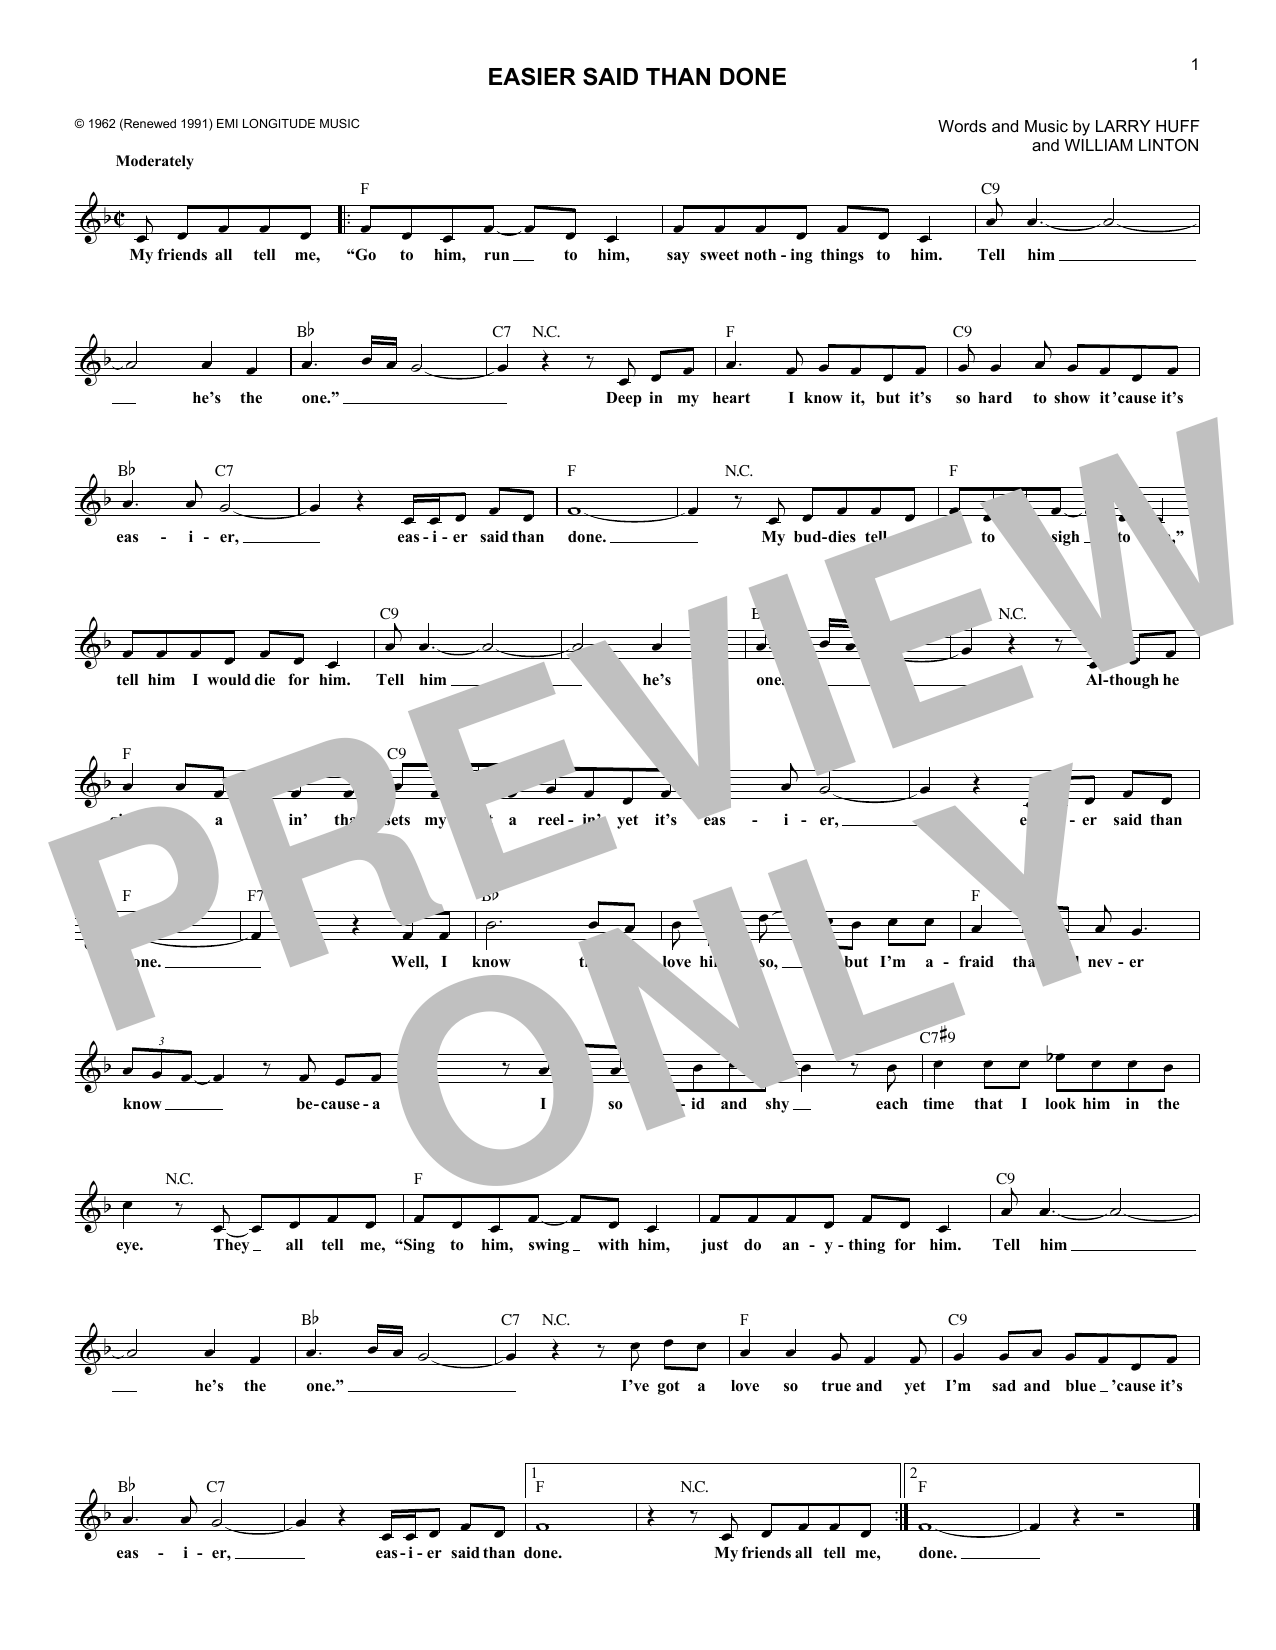 Download The Essex Easier Said Than Done Sheet Music